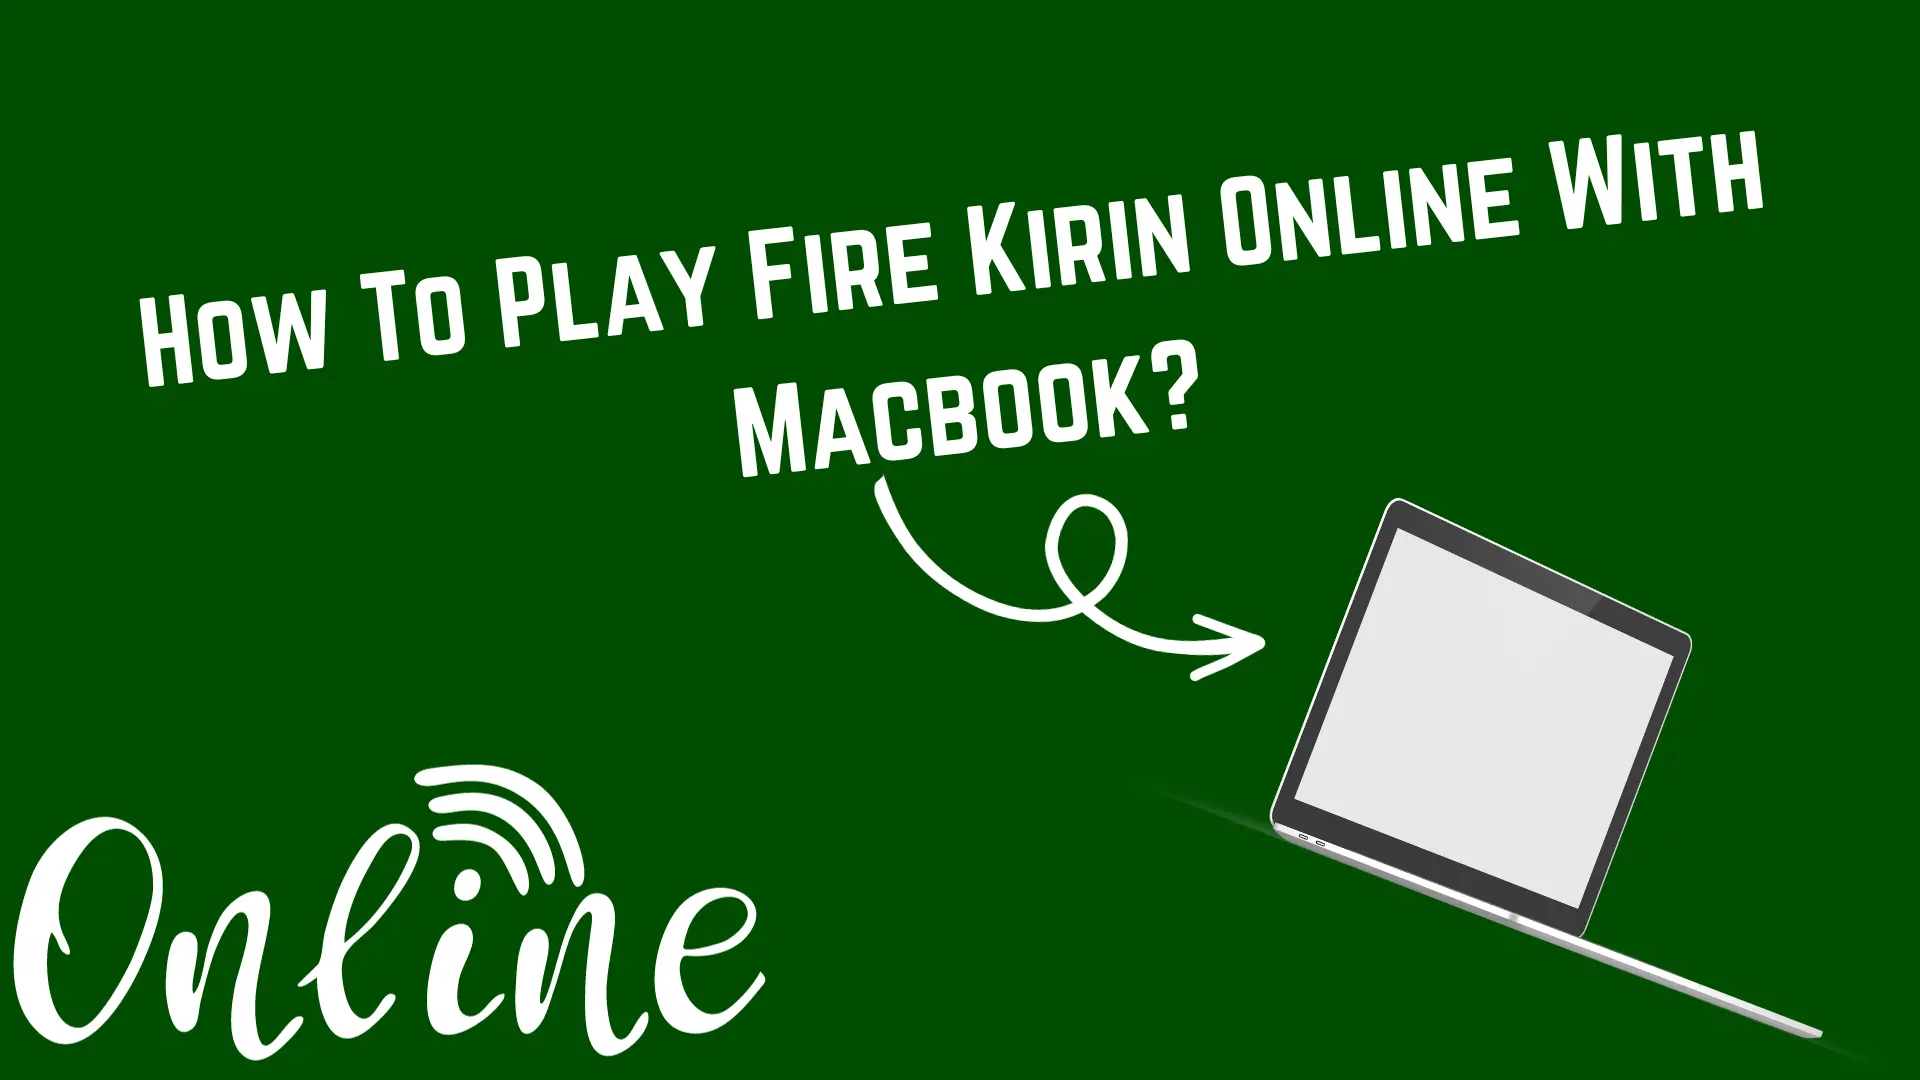 How To Play Fire Kirin Online With Macbook